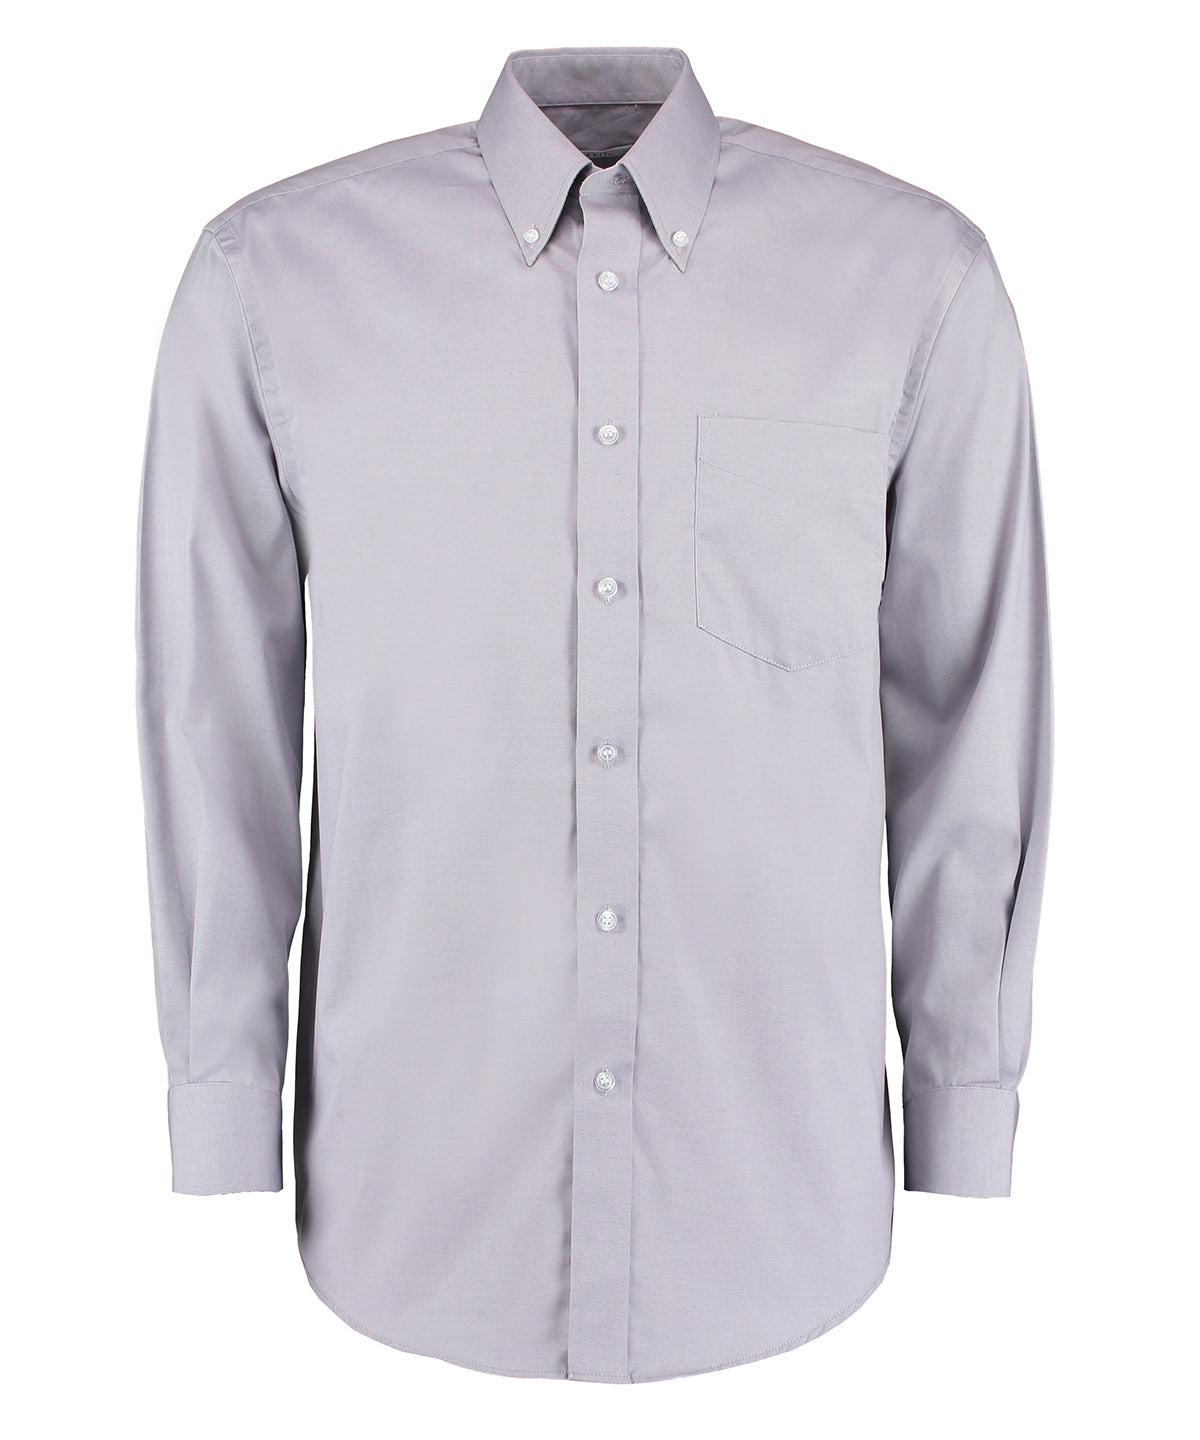 Corporate Oxford Shirt Long Sleeved Classic Fit - KK105